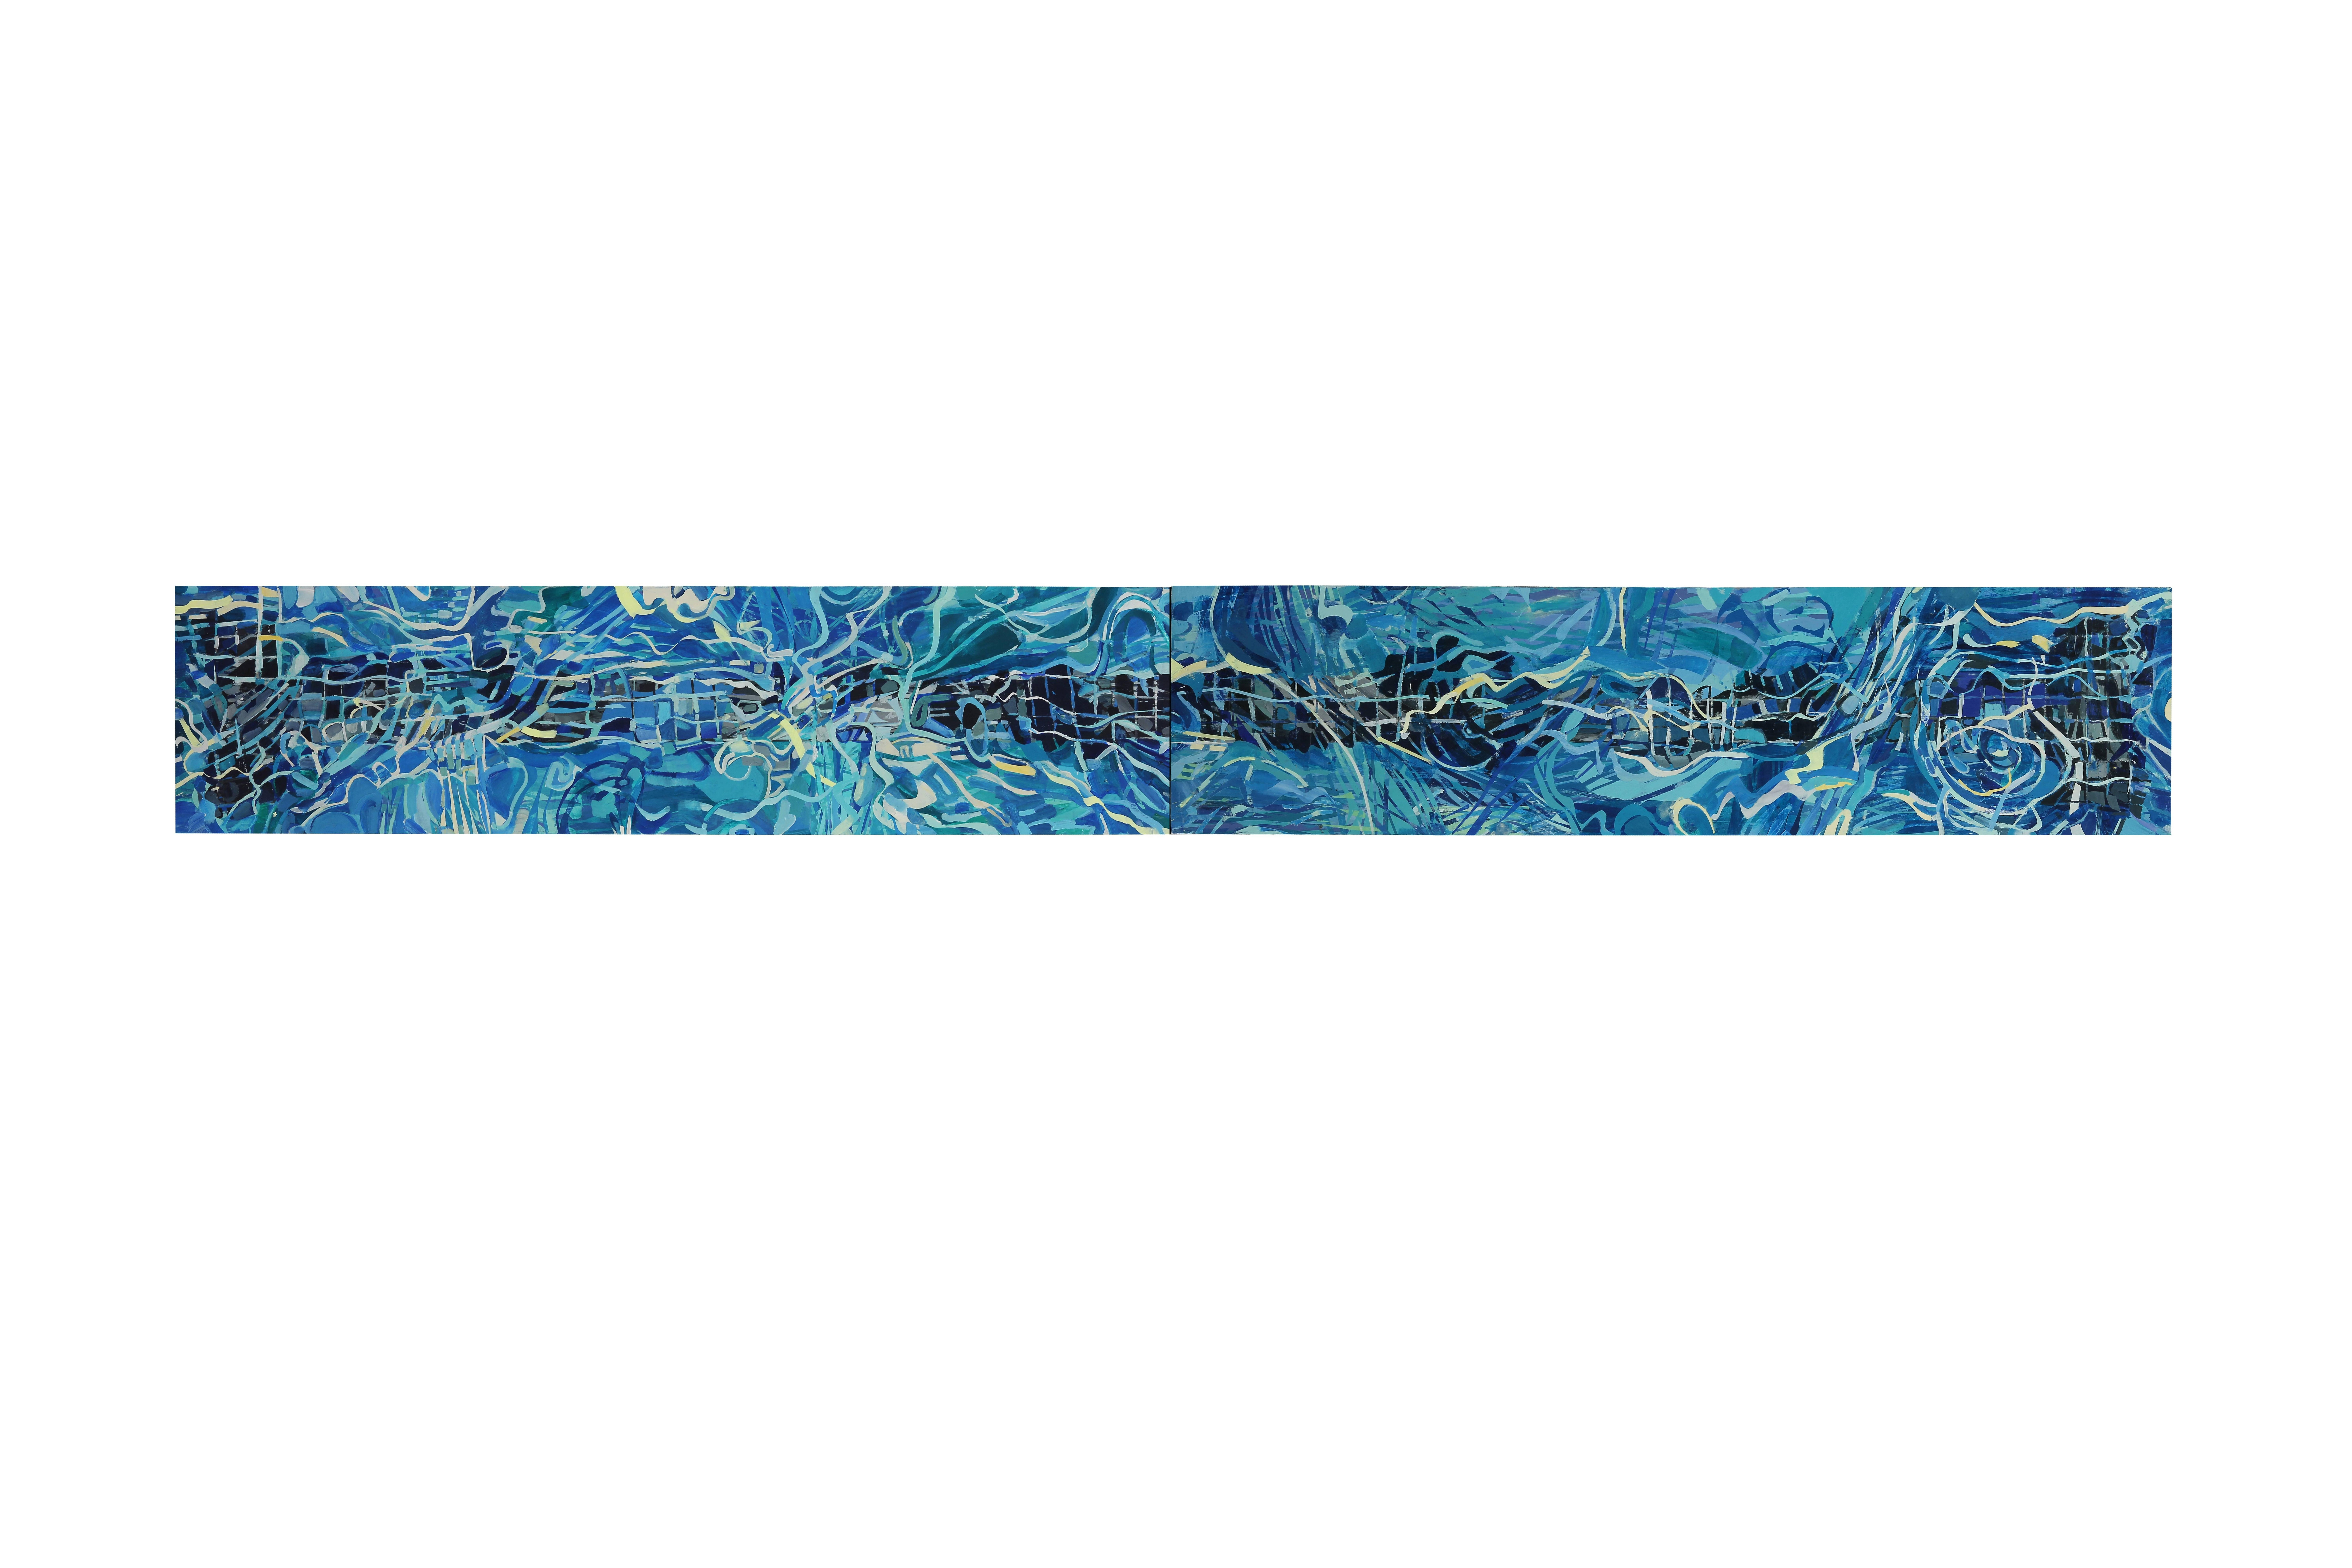 Kim Frohsin Abstract Painting - Pool Lanes:Turbulence I &II (12 x 96 inches)